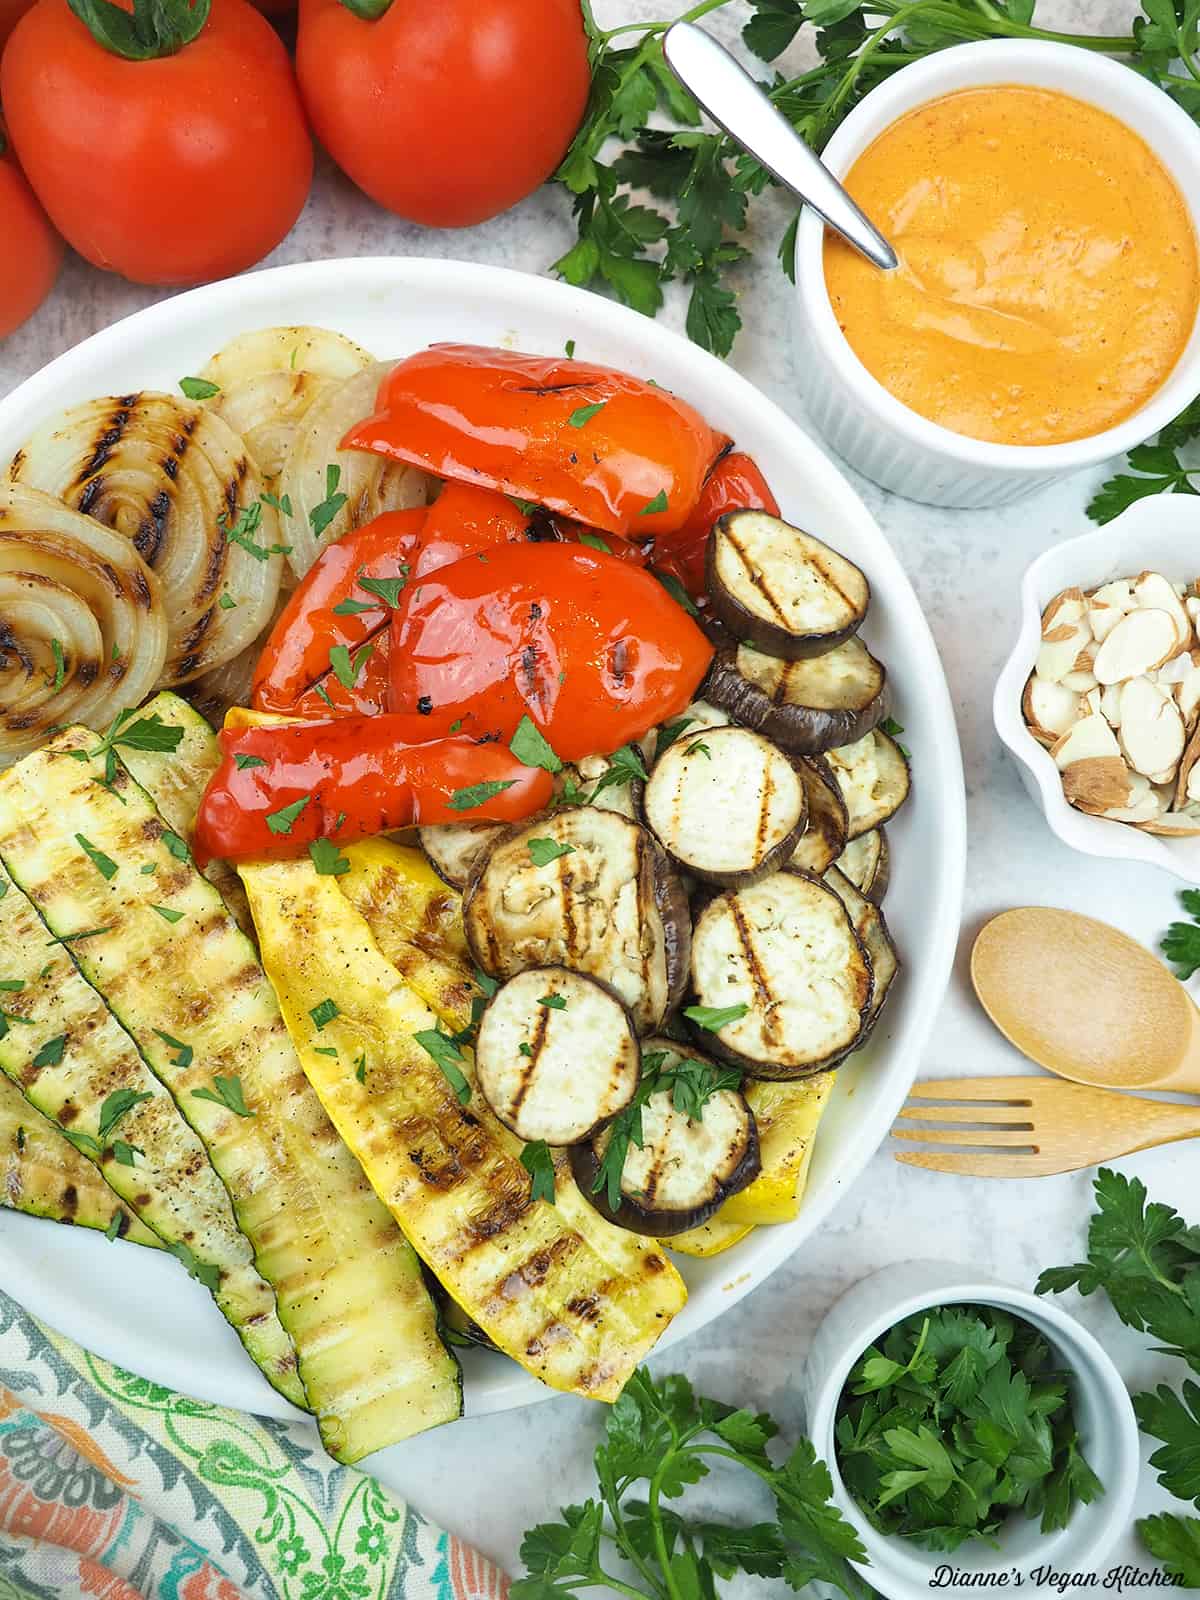 plate of grilled vegetables with tomatoes, eggplant, romesco, and almonds